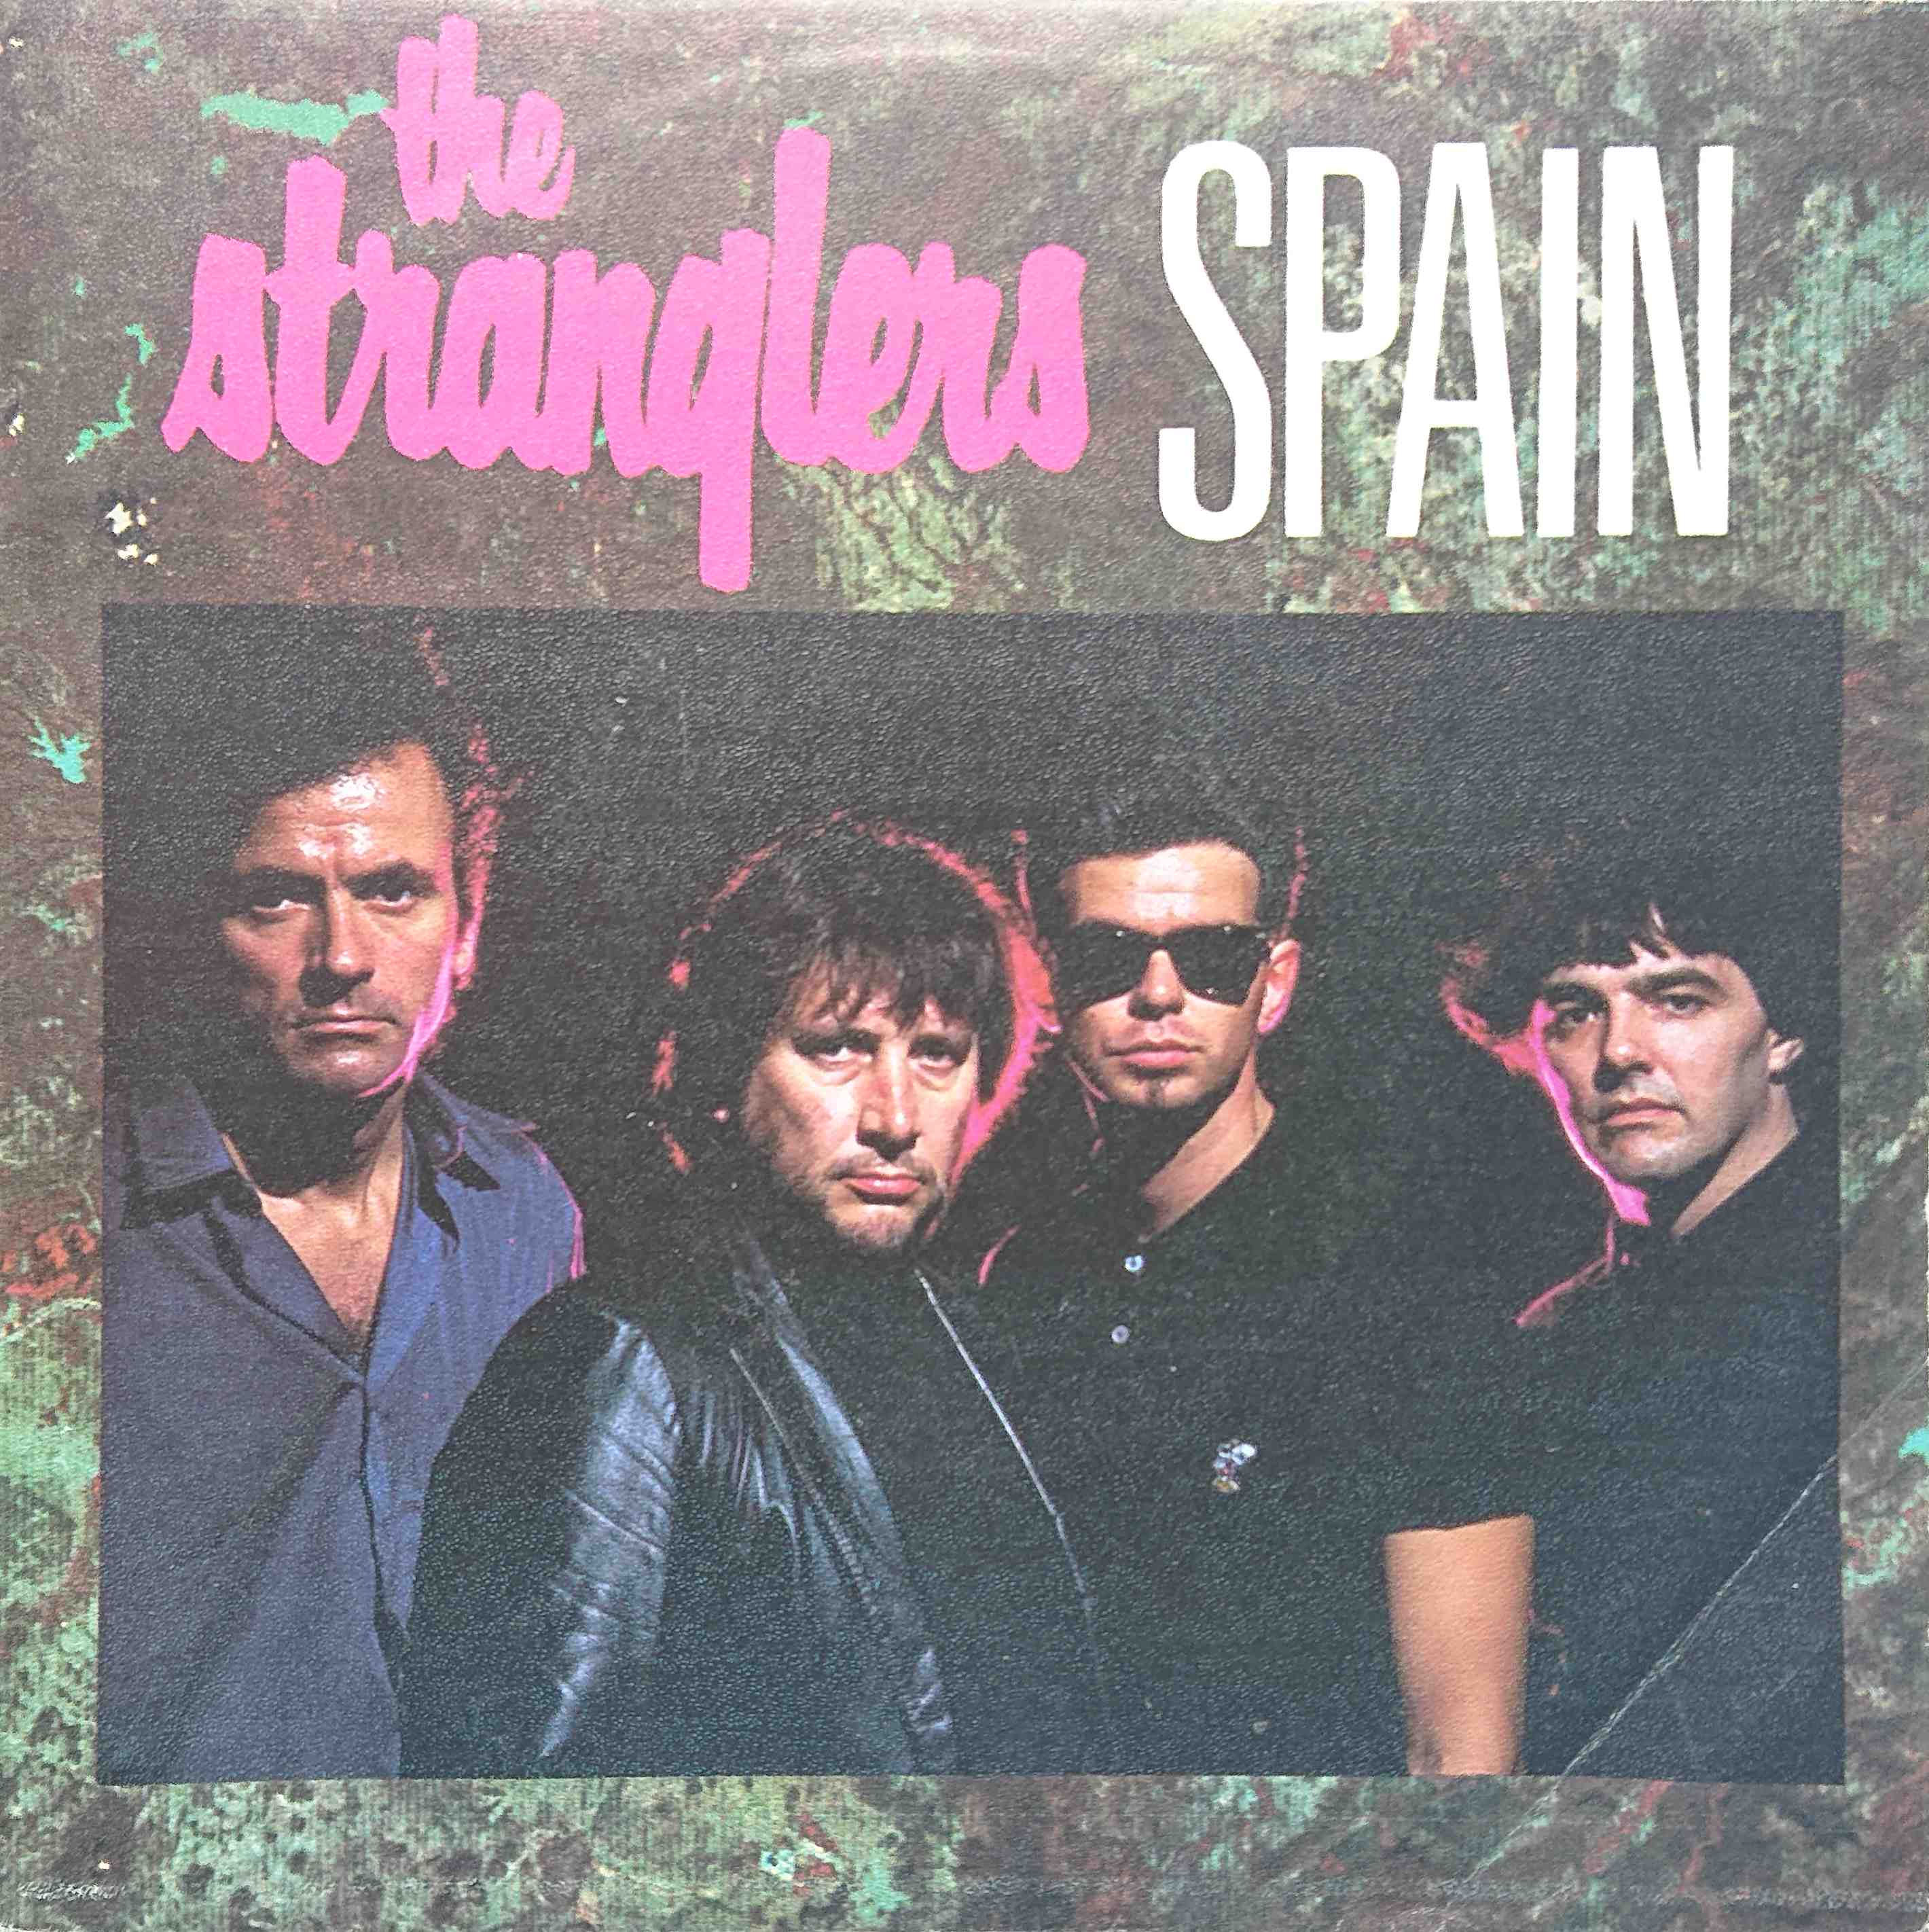 Picture of Spain by artist The Stranglers from The Stranglers singles